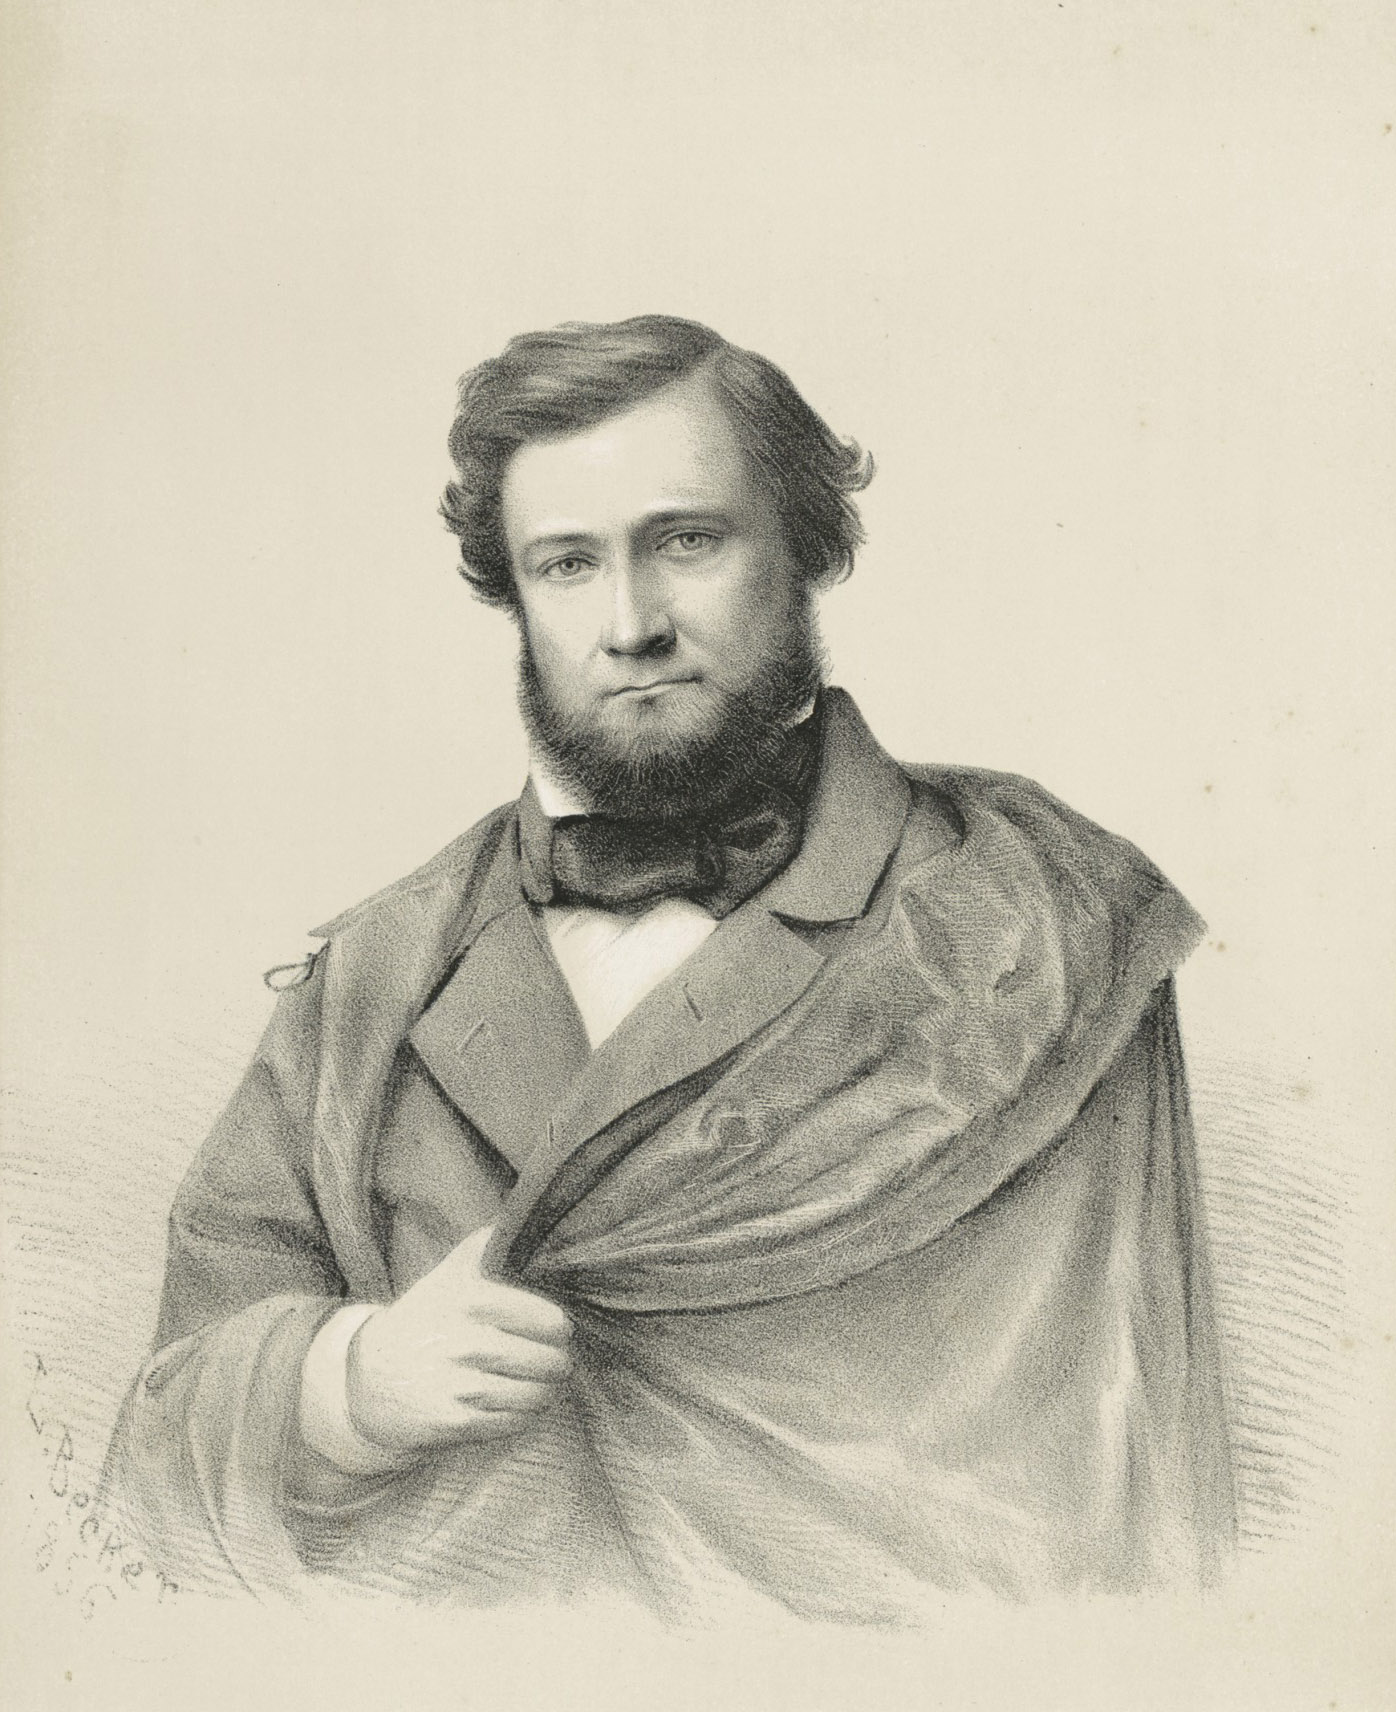 Peter Lalor, by Ludwig Becker, 1856.